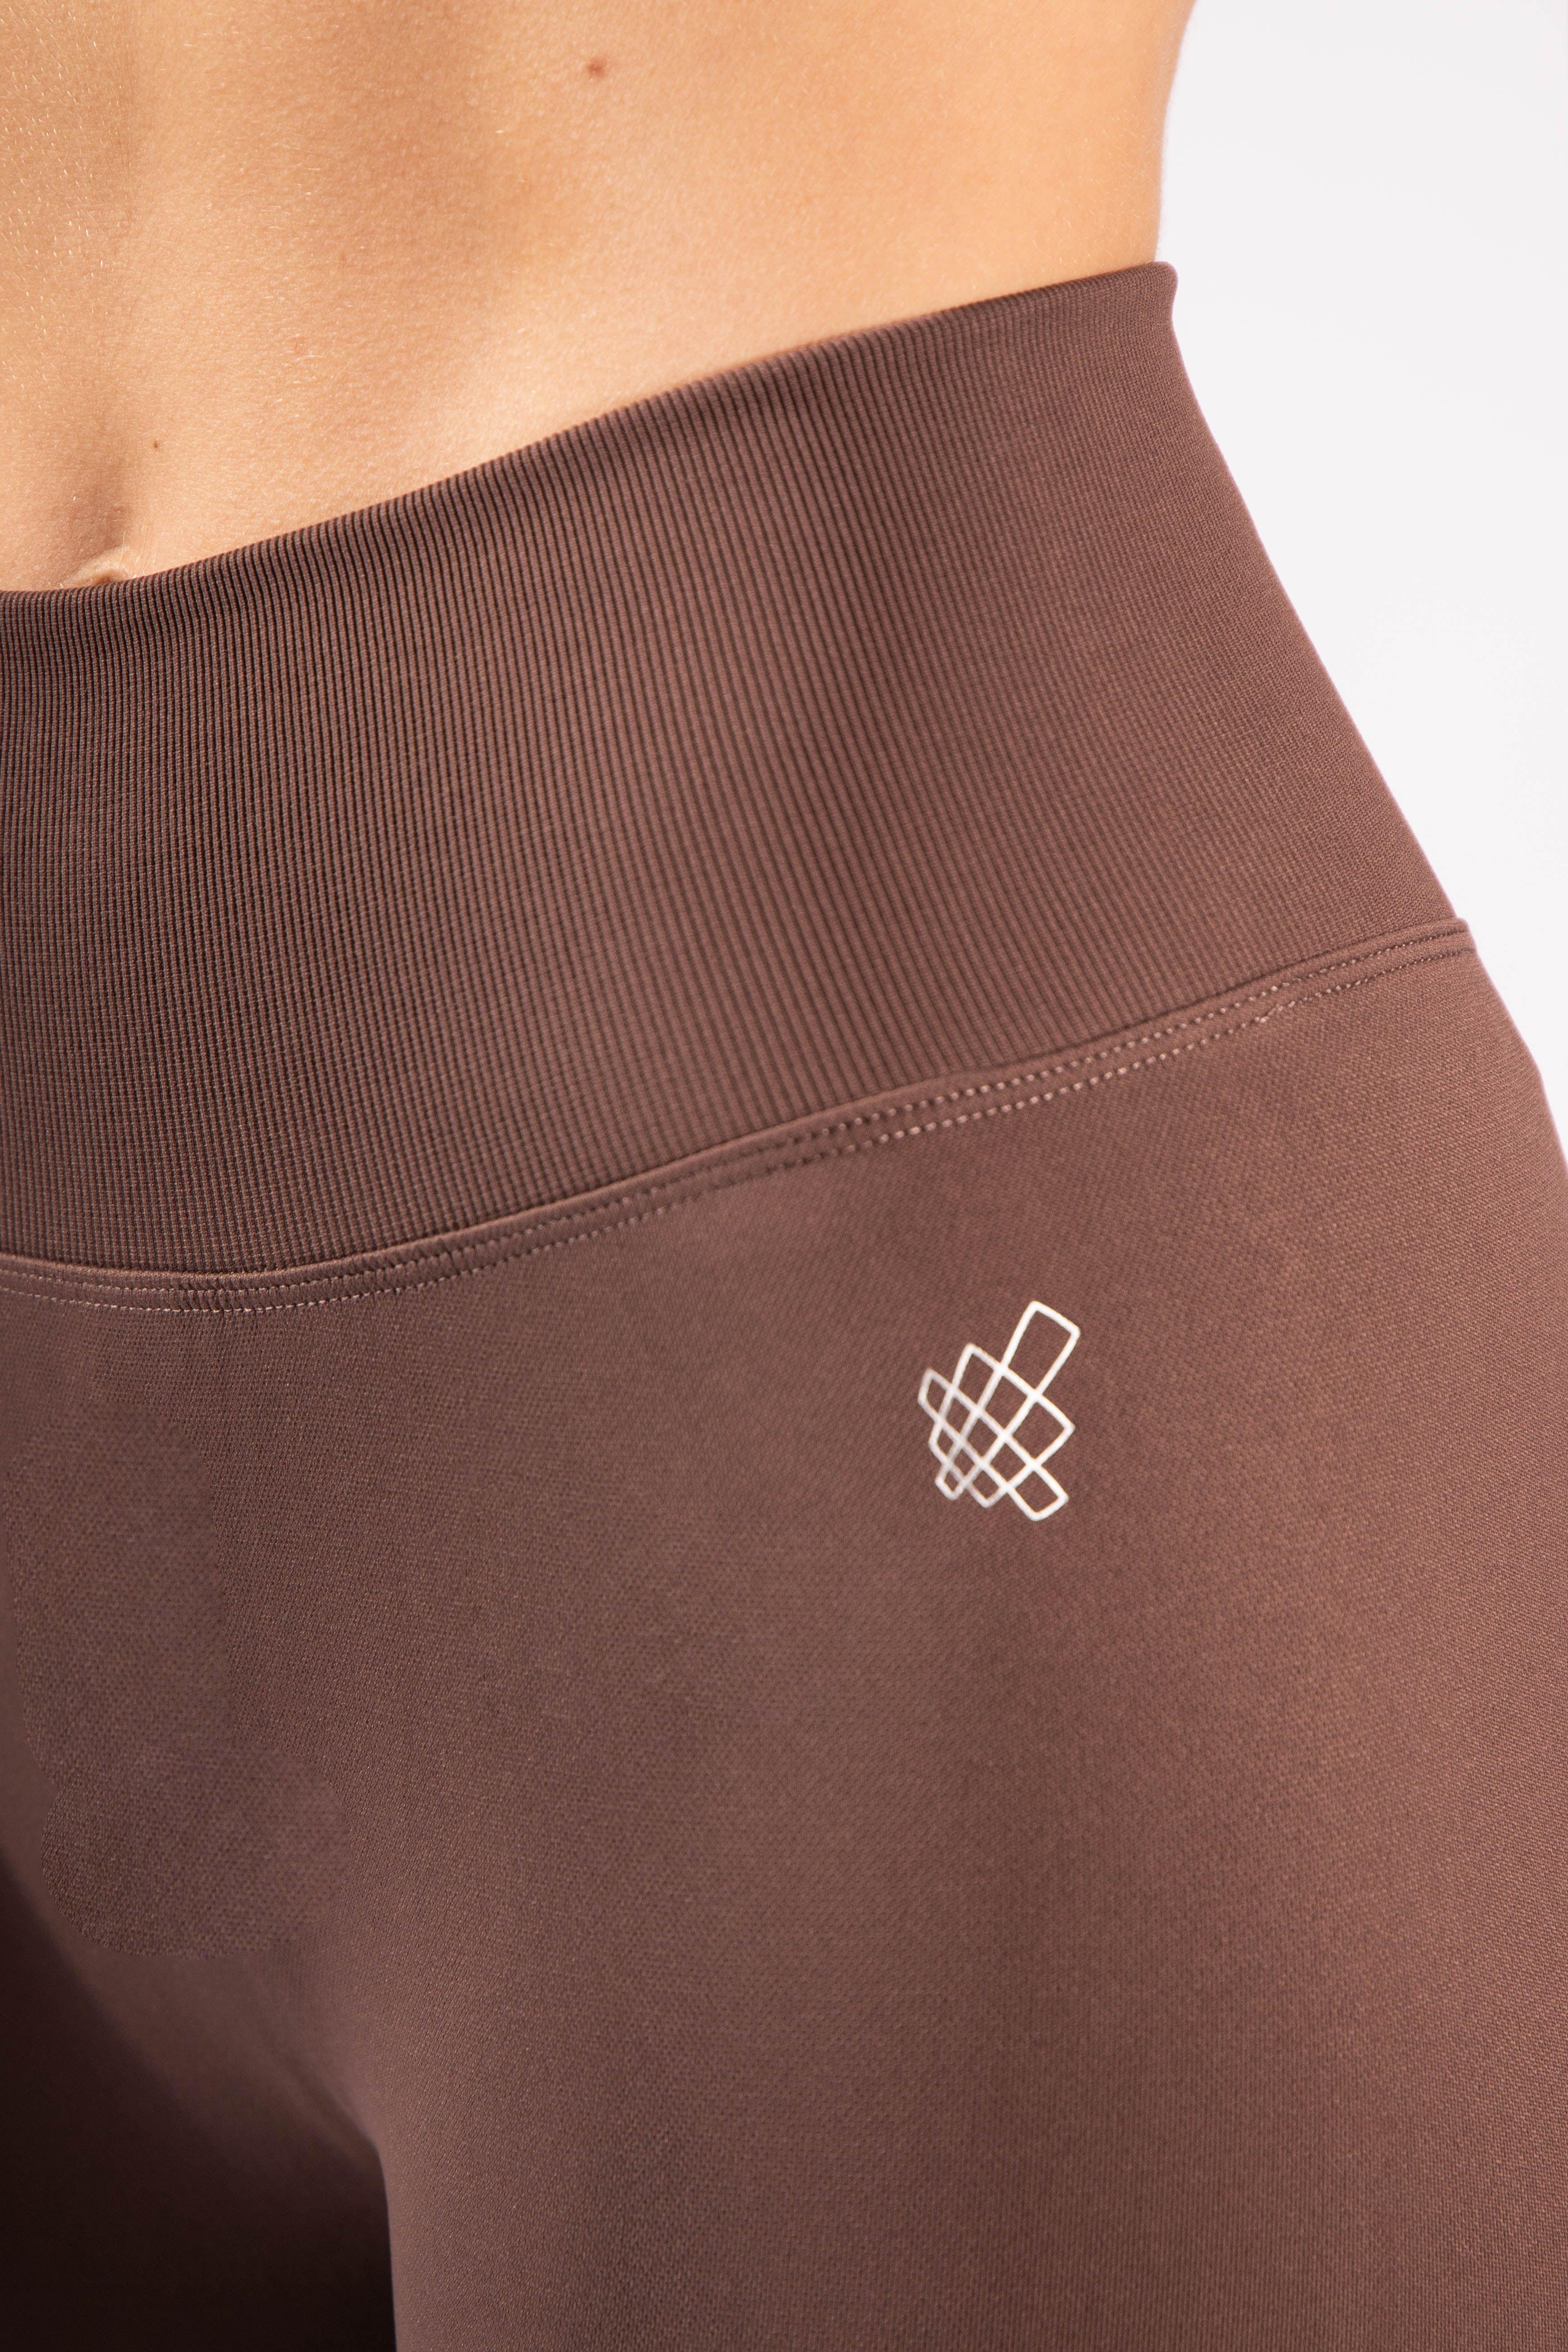 Active Seamless Workout Leggings - Brown - Jed North Canada